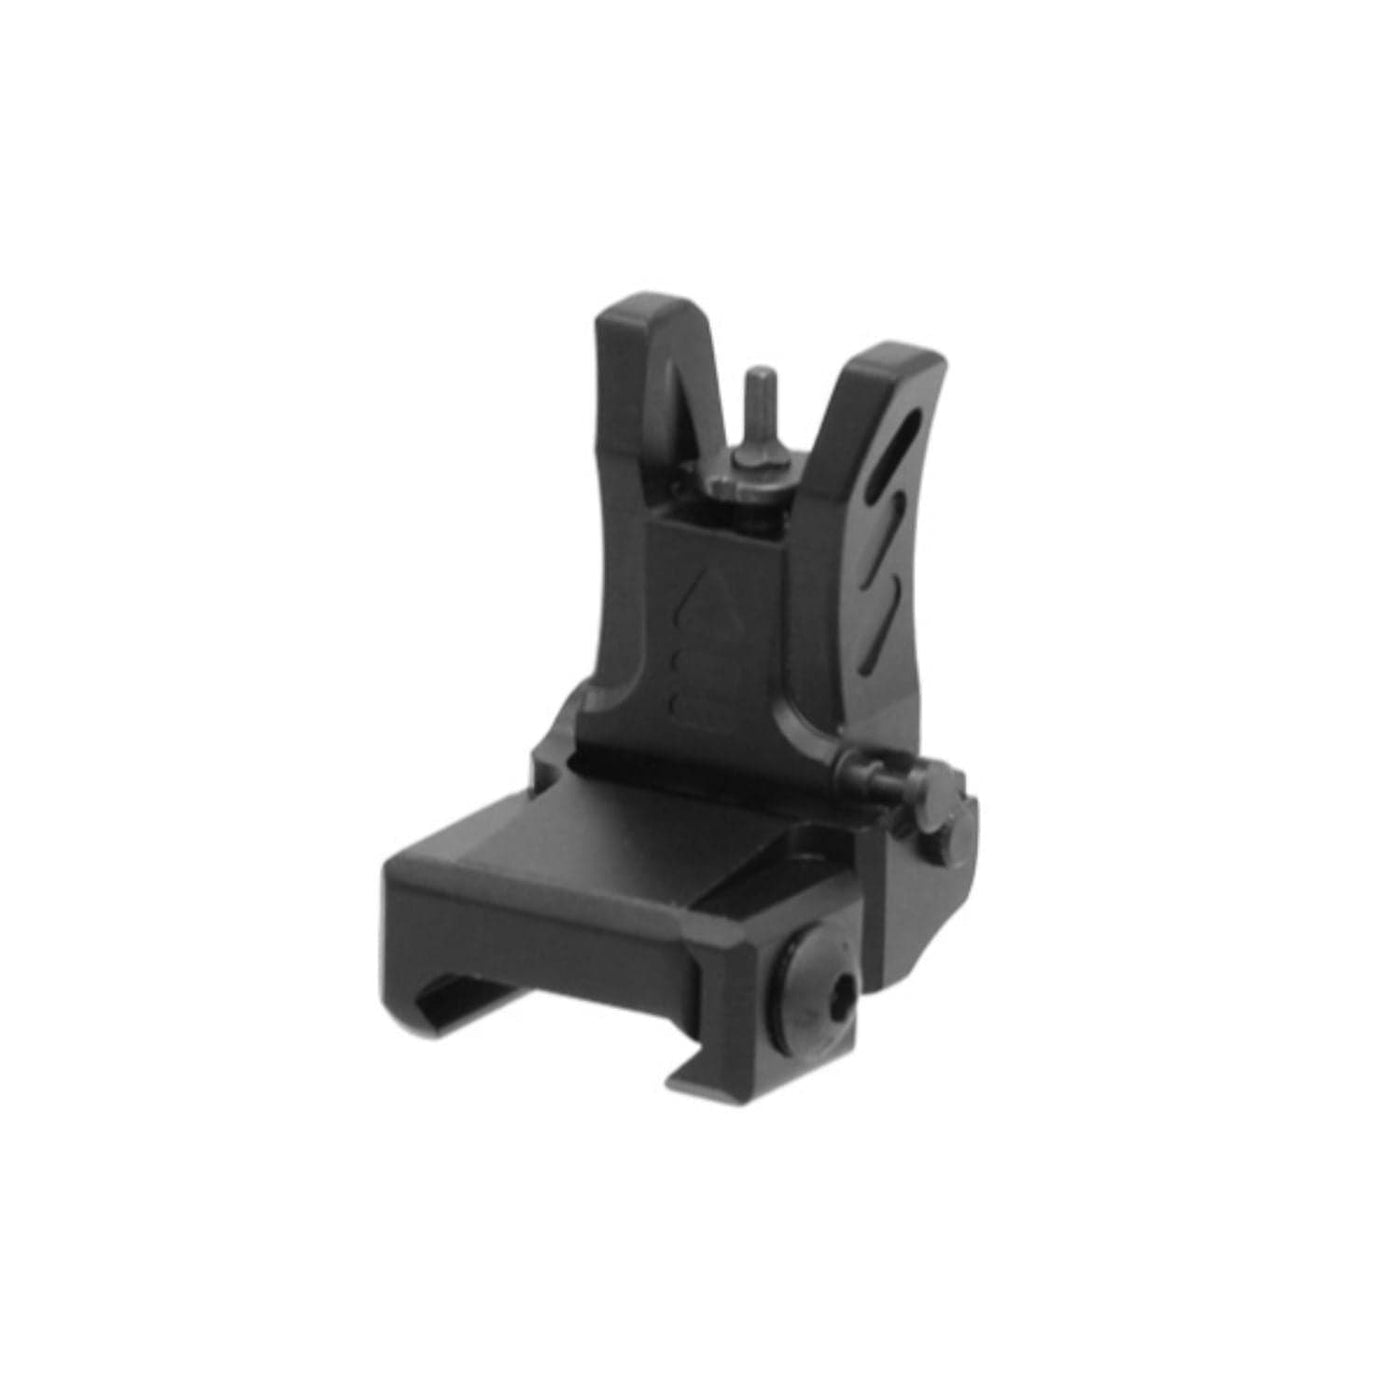 Leapers Leapers UTG AR15 LowProfile Flip-up FrontSight for Handguard Optics And Sights